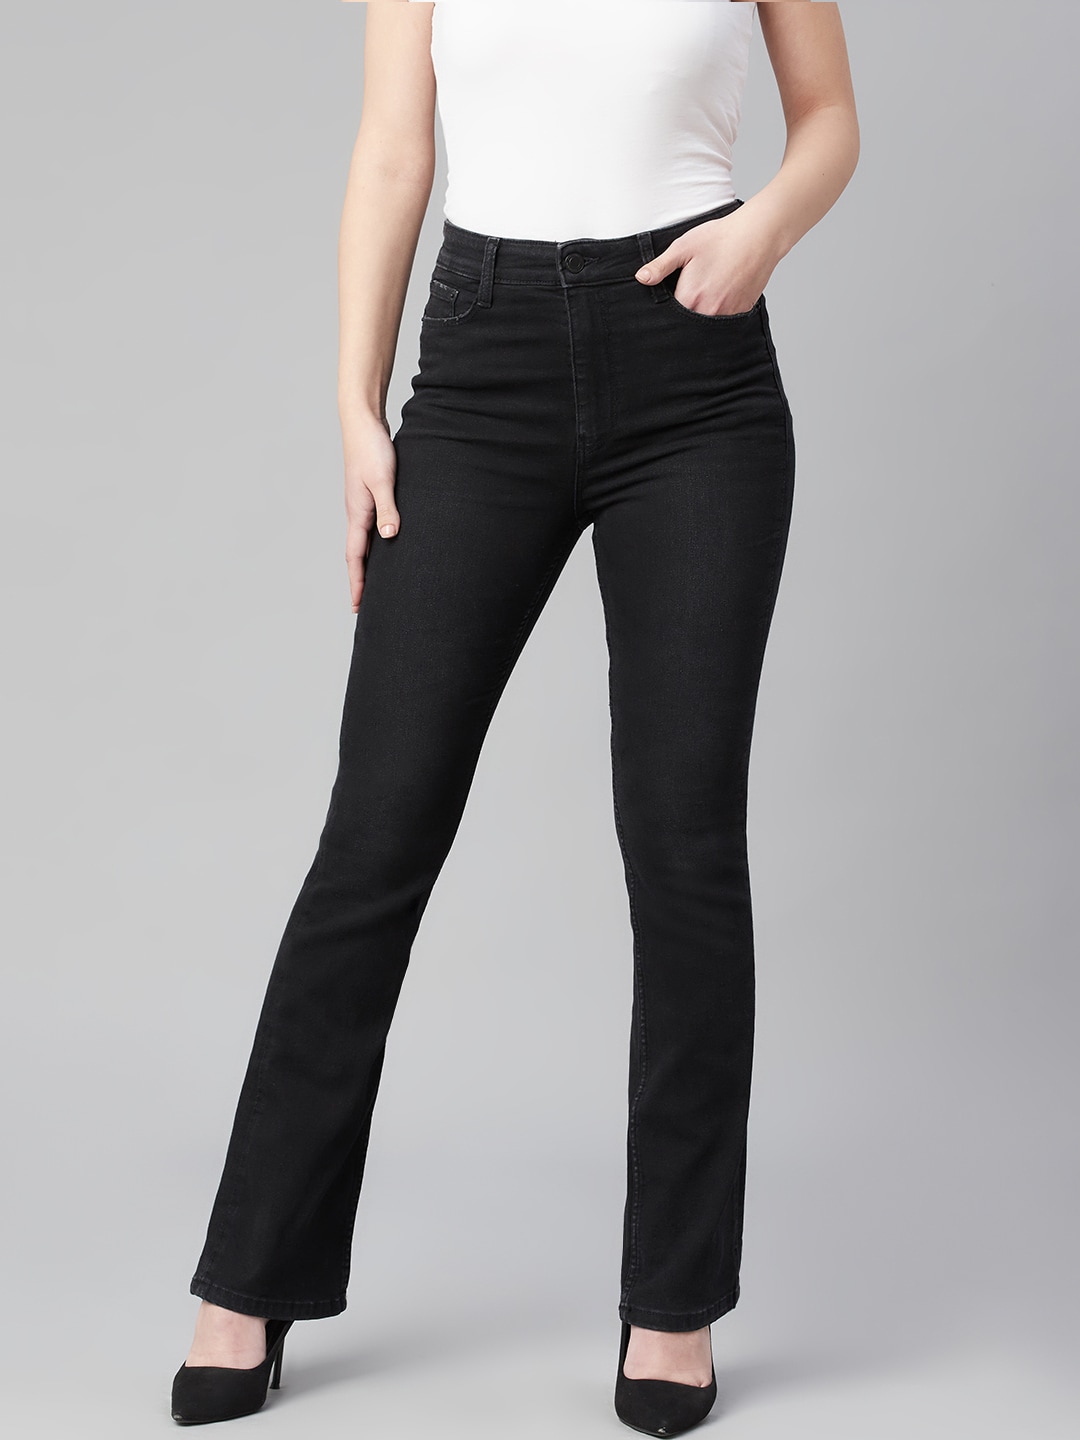 Marks & Spencer Women Black Solid Slim Flared Light Fade Stretchable Jeans Price in India